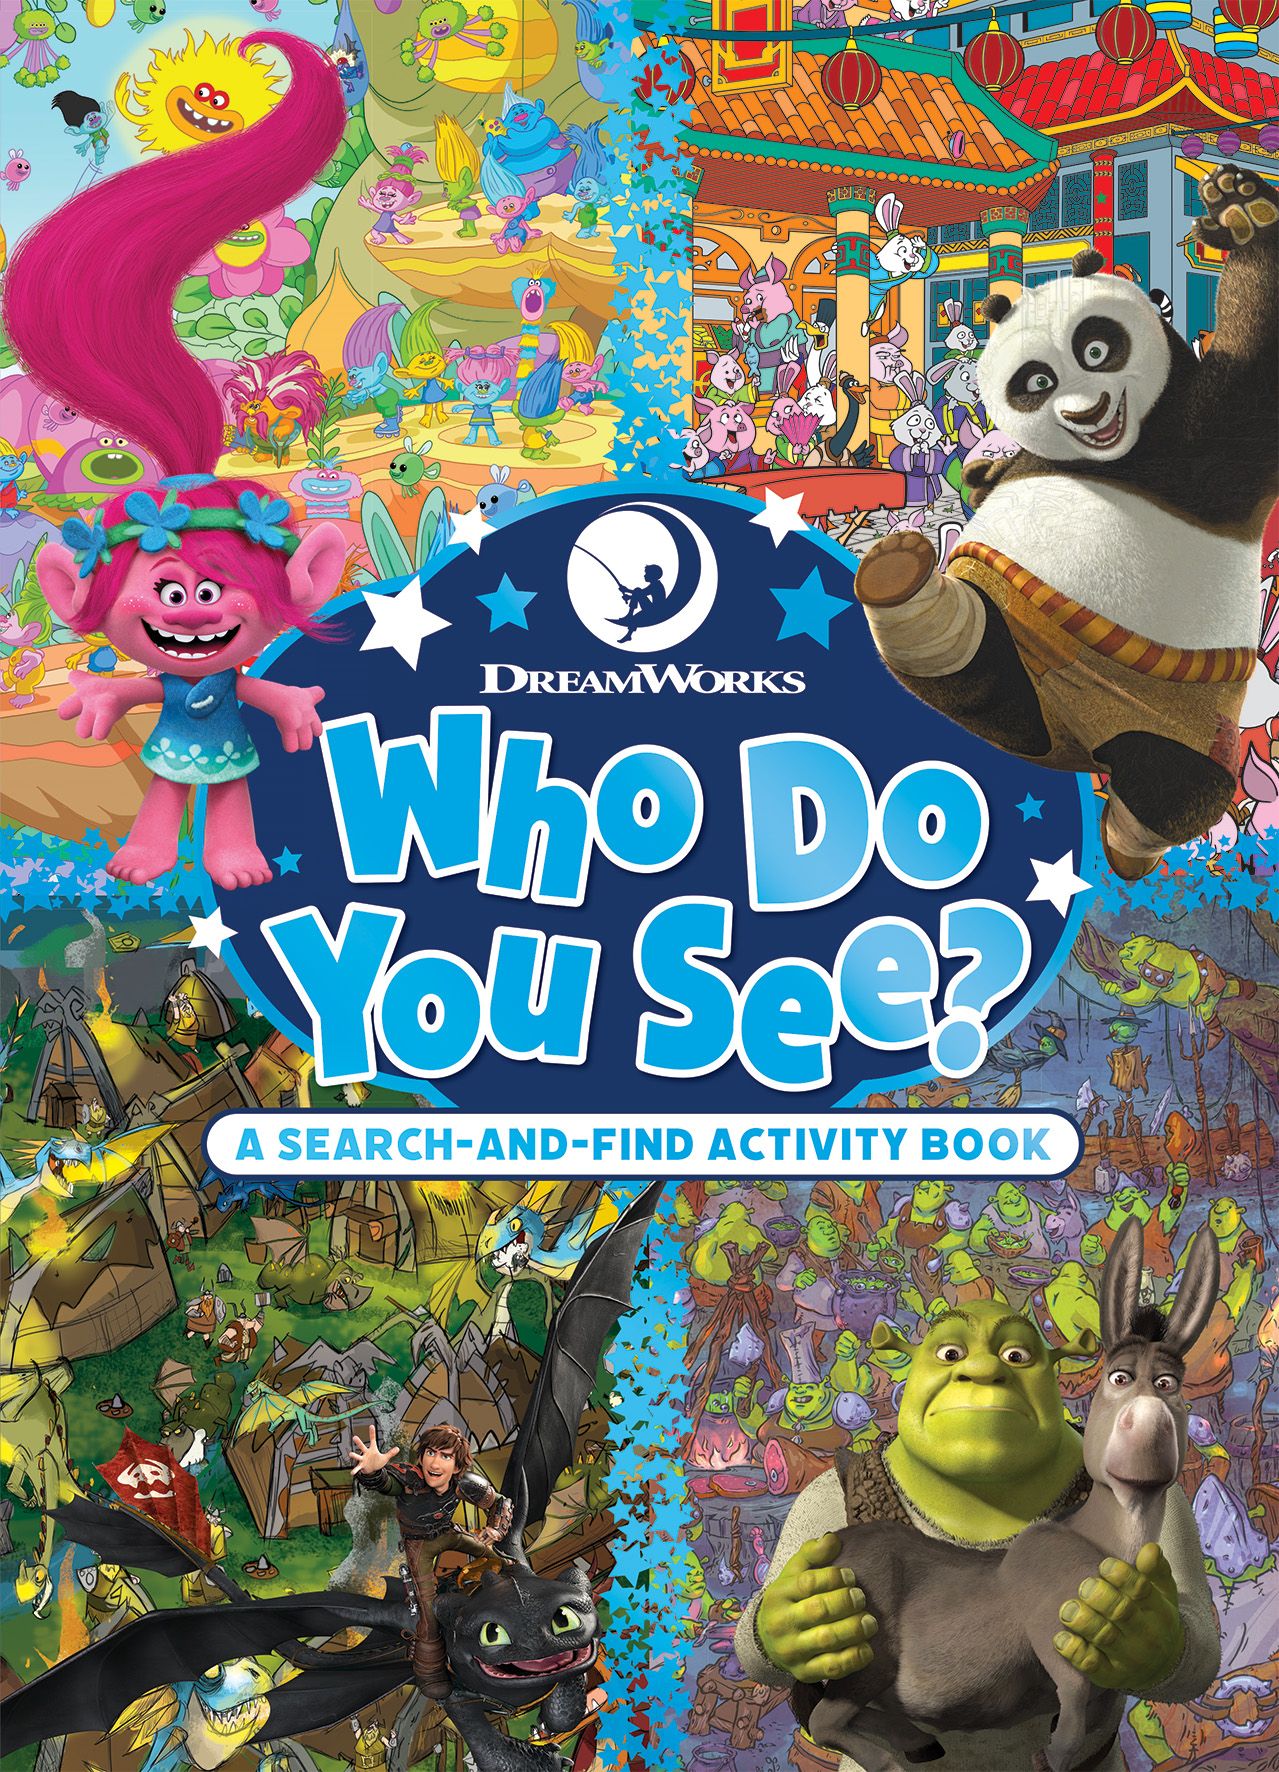 DreamWorks: Who Do You See? A Search-and-Find Activity Book